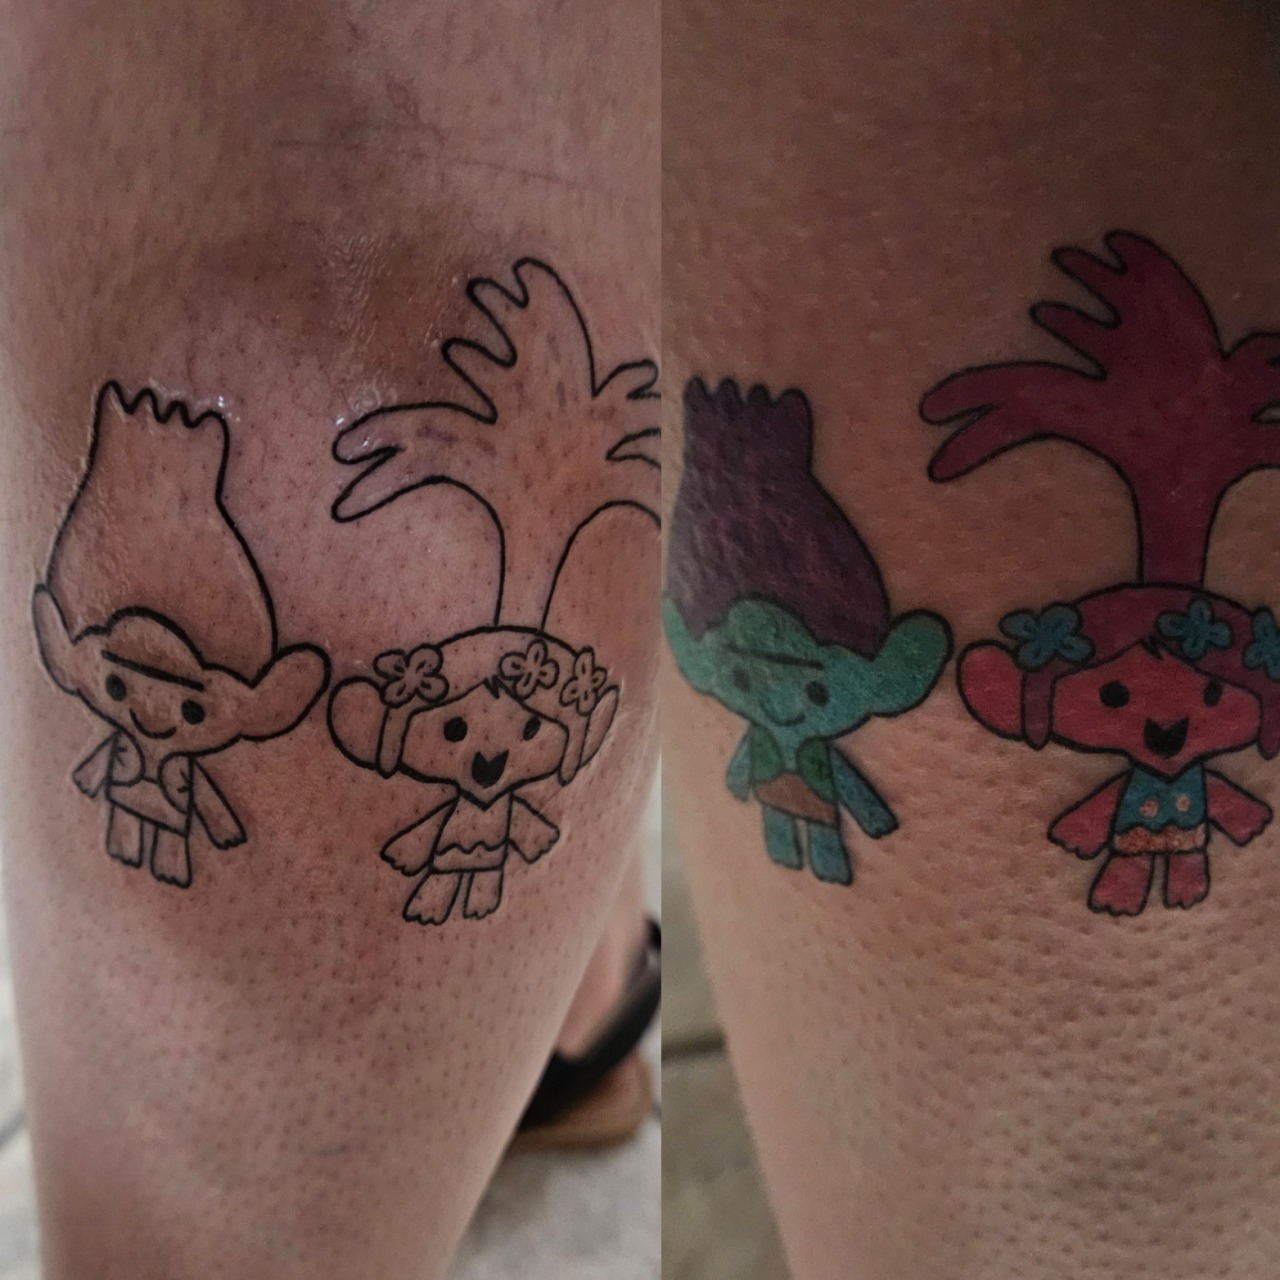 Poppy Trolls tattoo done by Bob Price at Inferno studios in Kane PA | Alden  Tanski | Emo tattoos, Tattoos with meaning, Tattoos